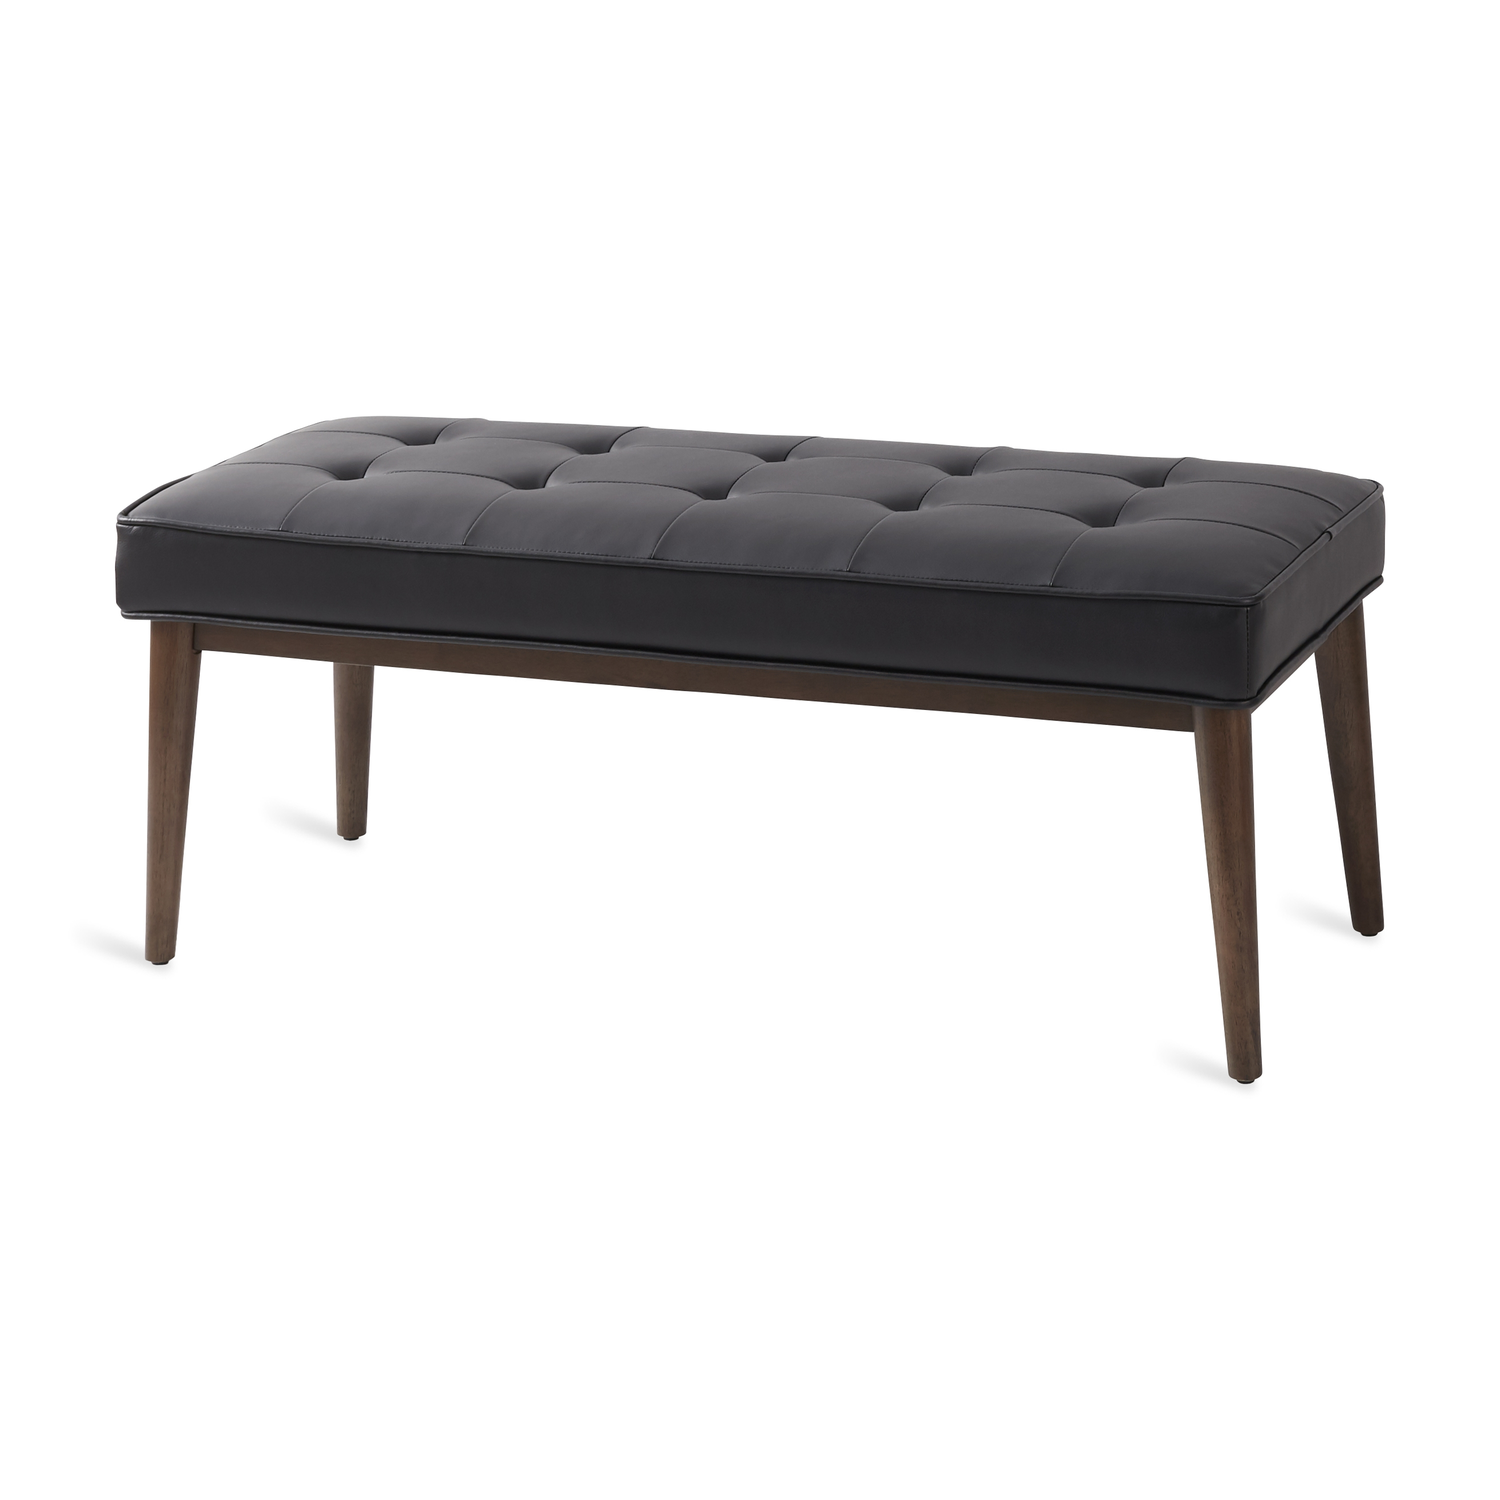 Colton Upholstered Bench, Black Faux Leather